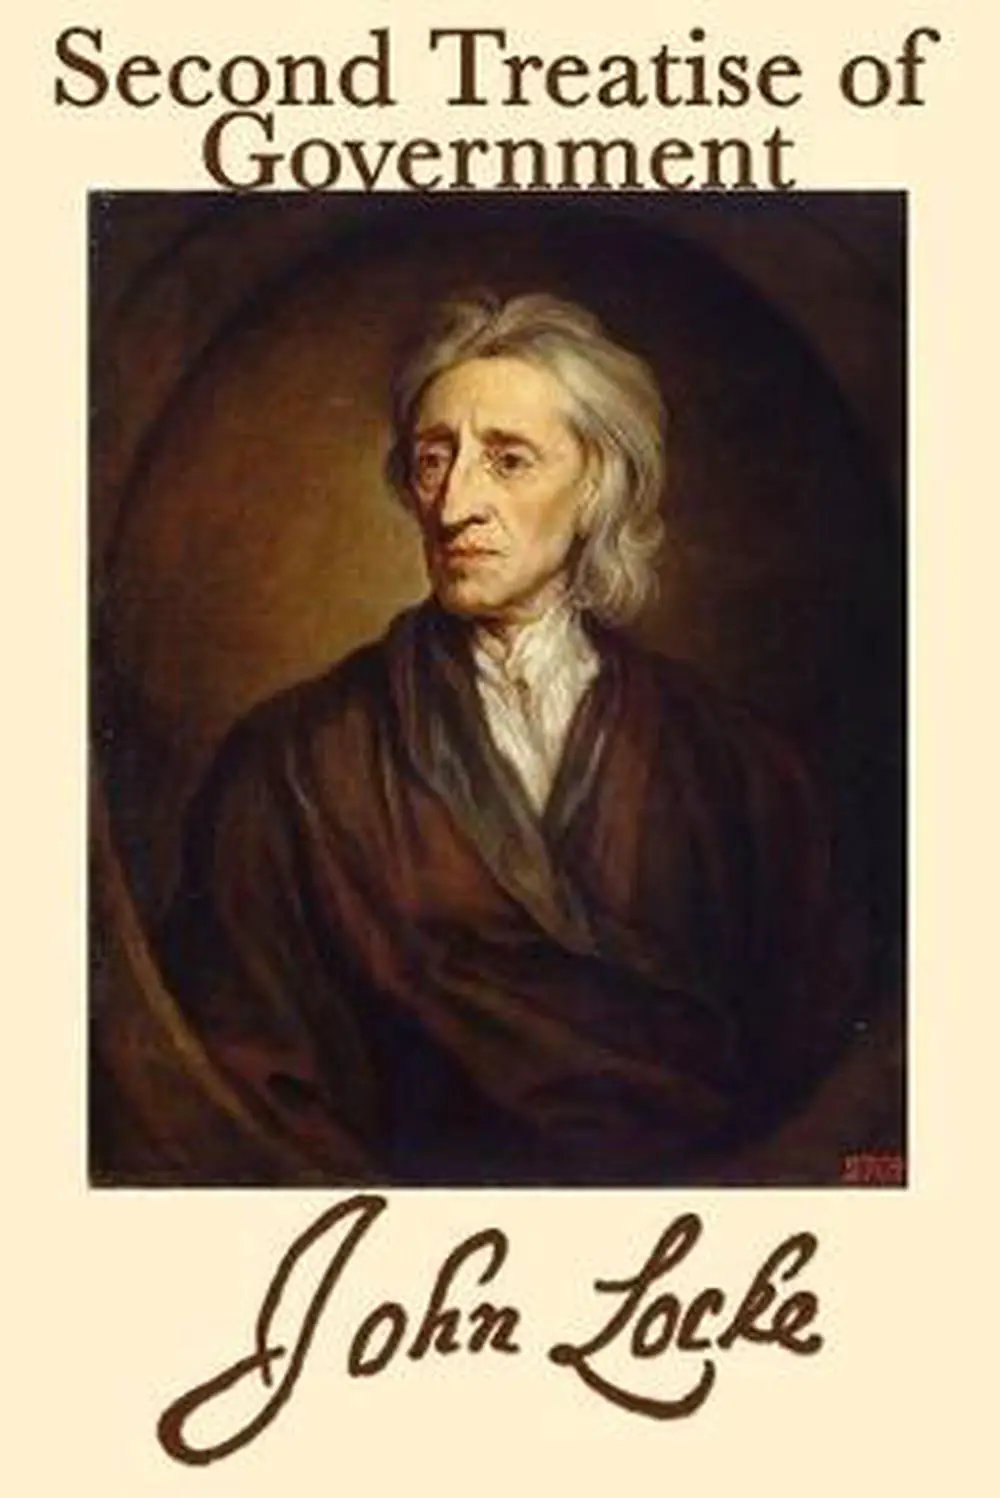 Second Treatise of Government by John Locke (English) Paperback Book ...